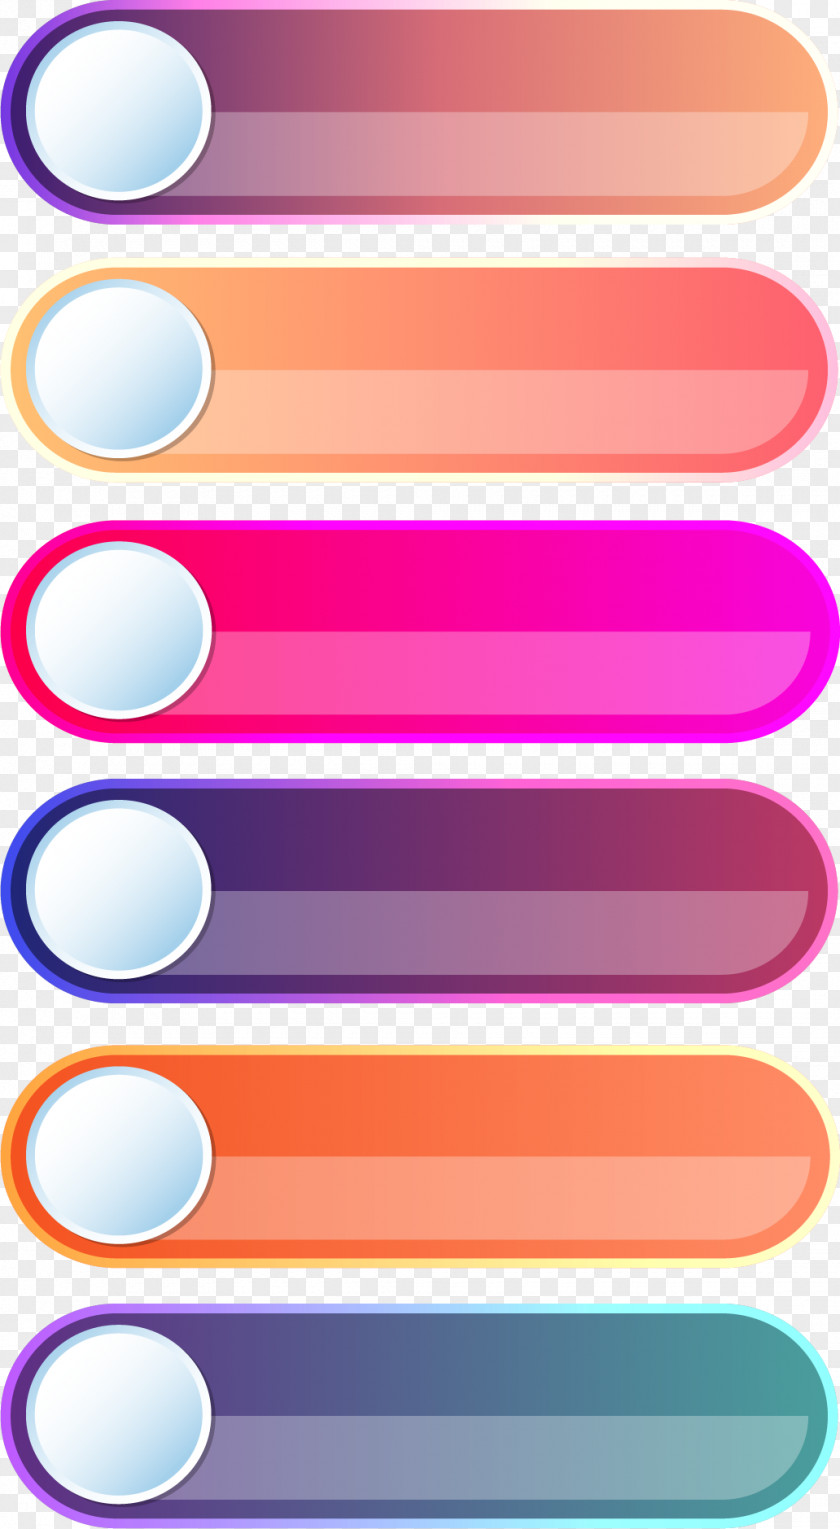 Dream Colorful Scroll Graphic Design PNG